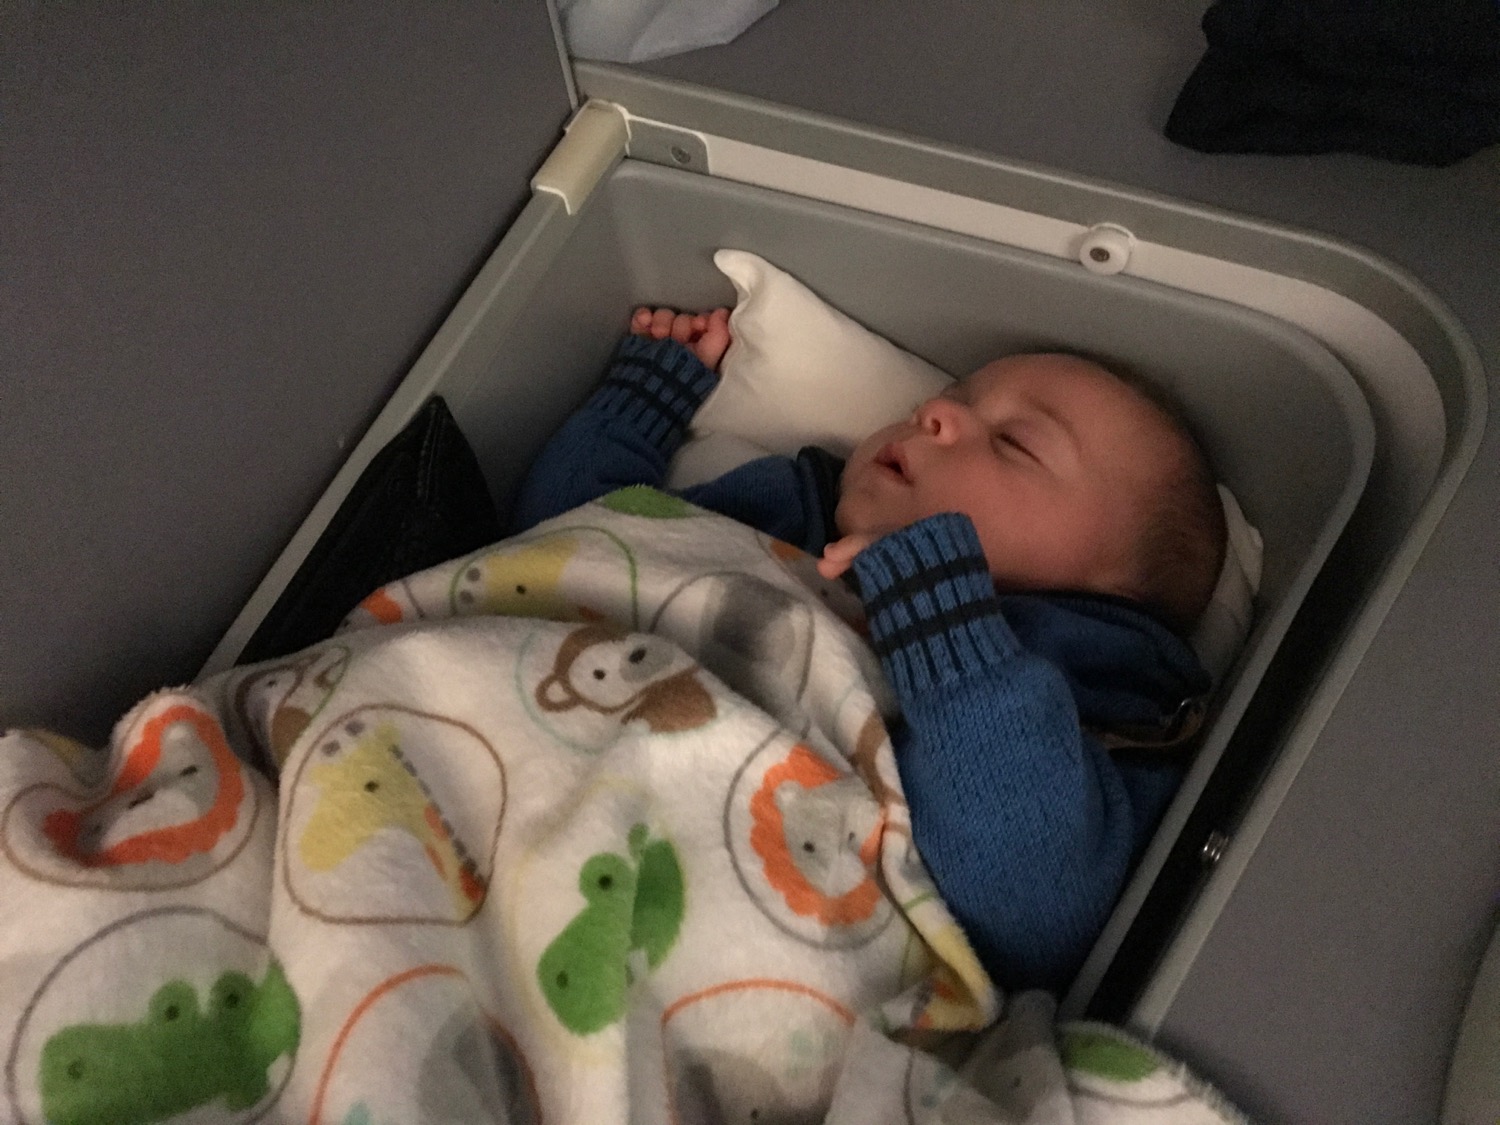 A quick guide for United Airlines Infant Policy